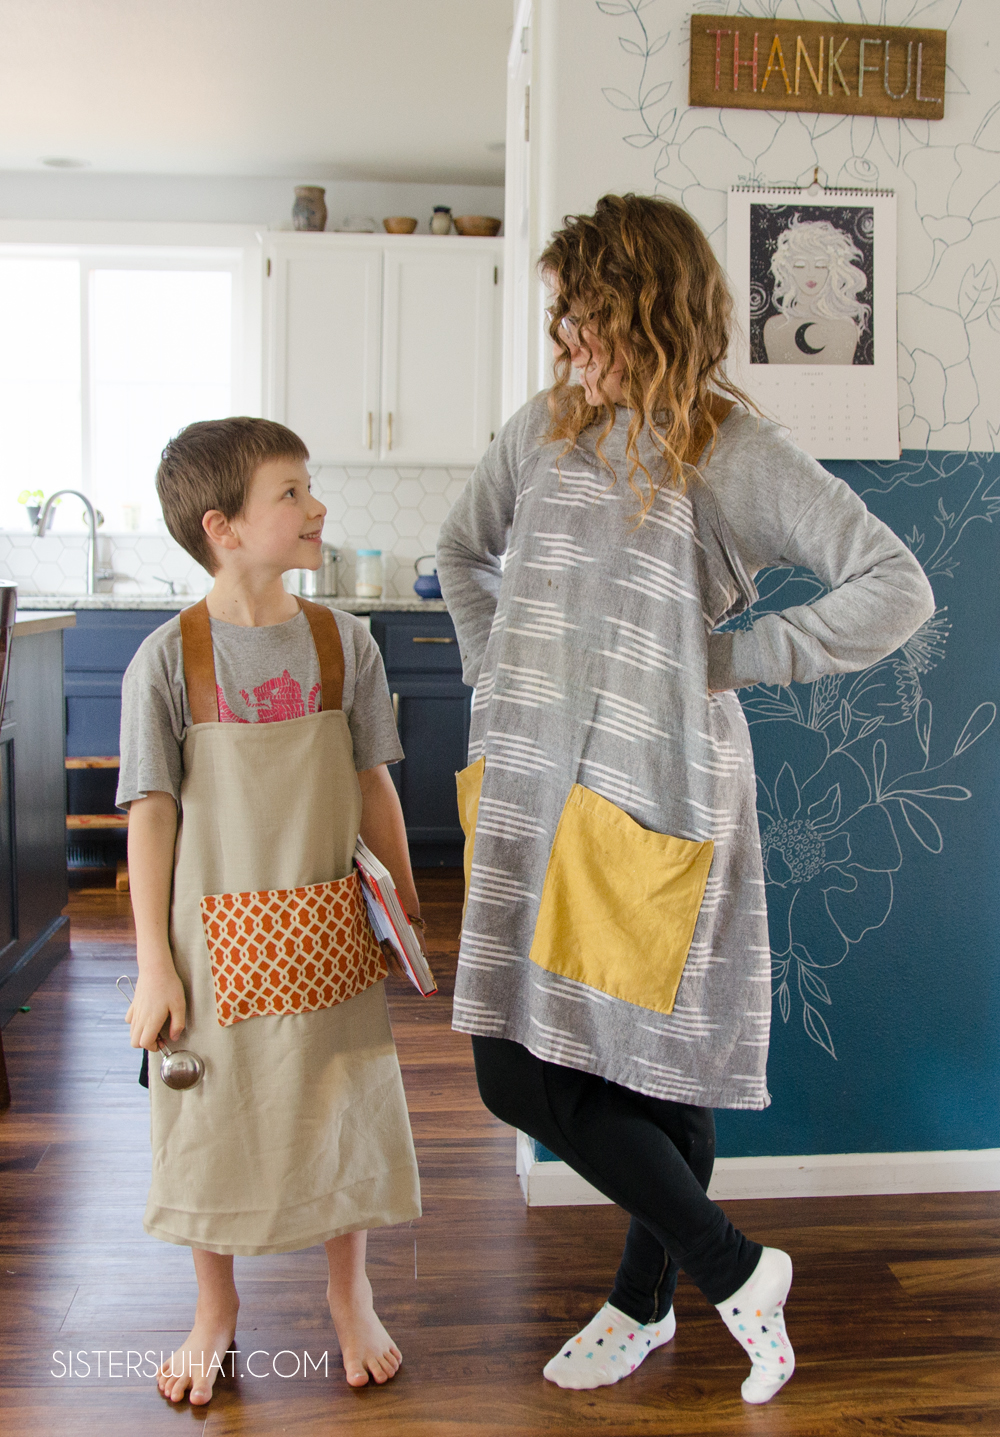 How to Sew A Child's Apron